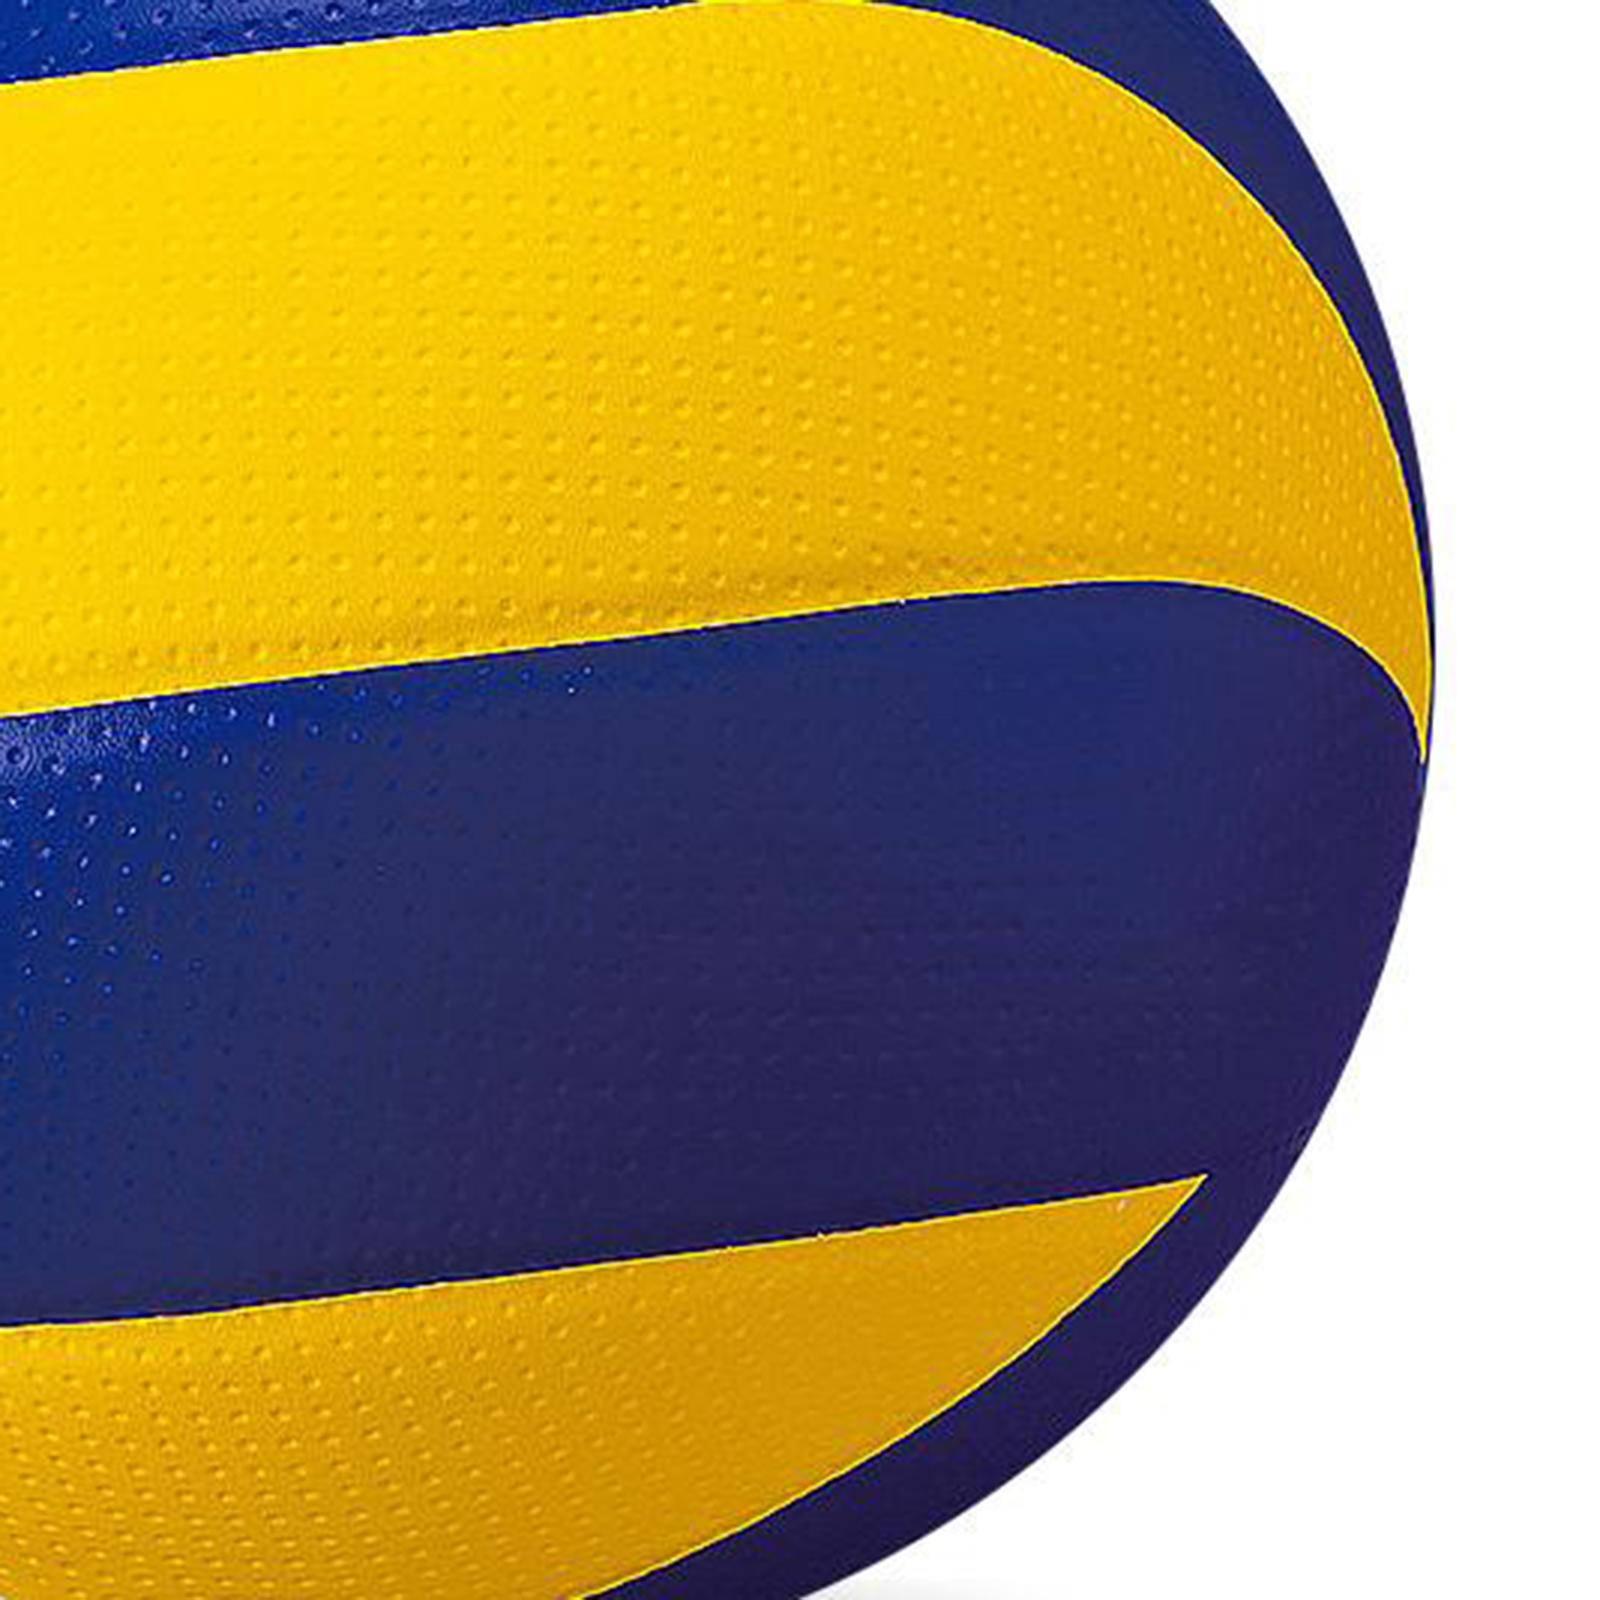 Beach Volleyball Soft Touch Volley Ball Official Size 5 Beach Ball Pool Ball